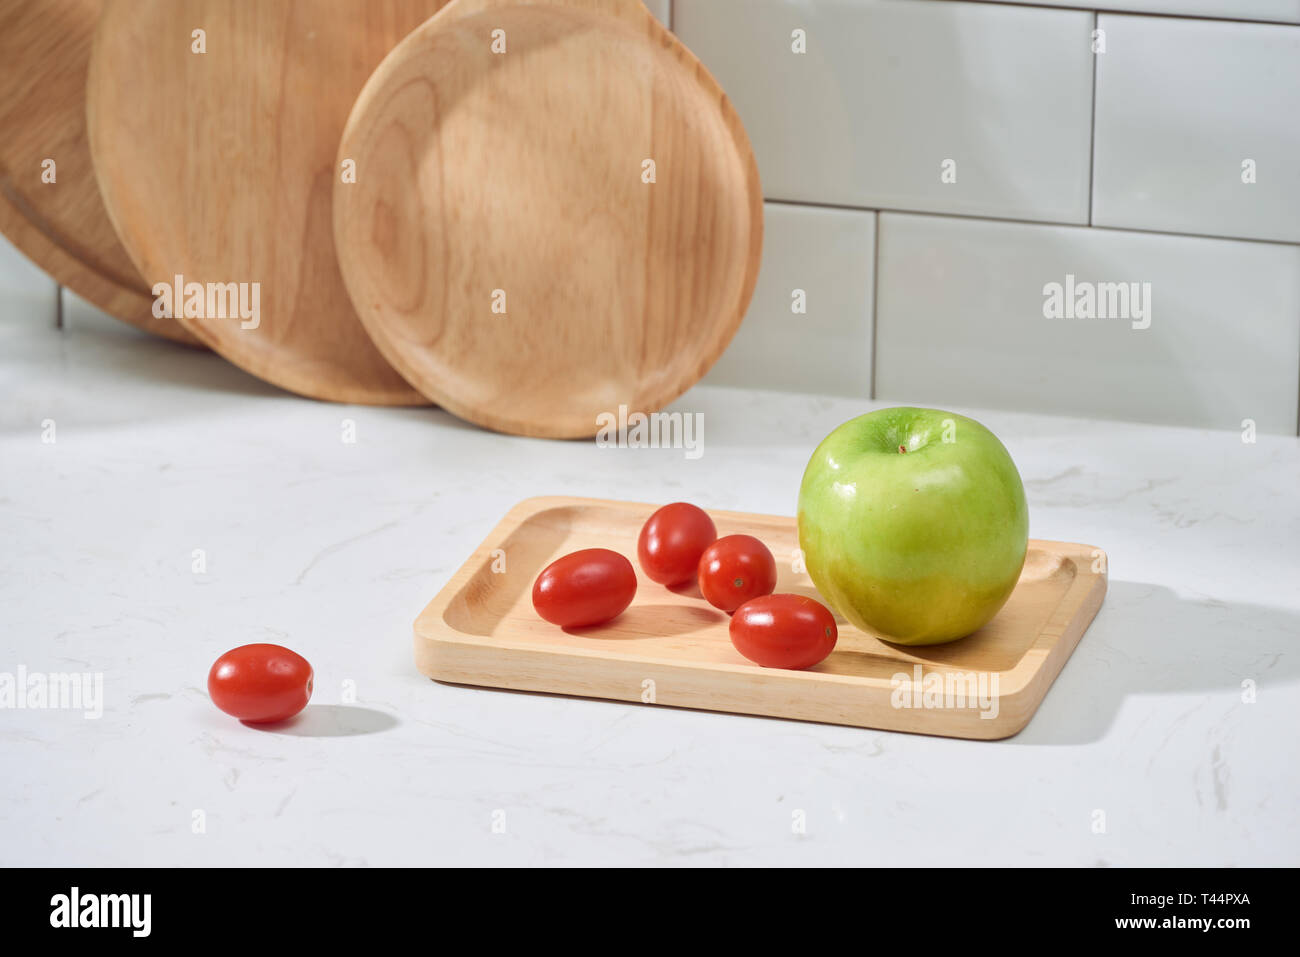 Kitchen utensils with fresh vegetable and fruit on the table. Kitchen still life. Stock Photo